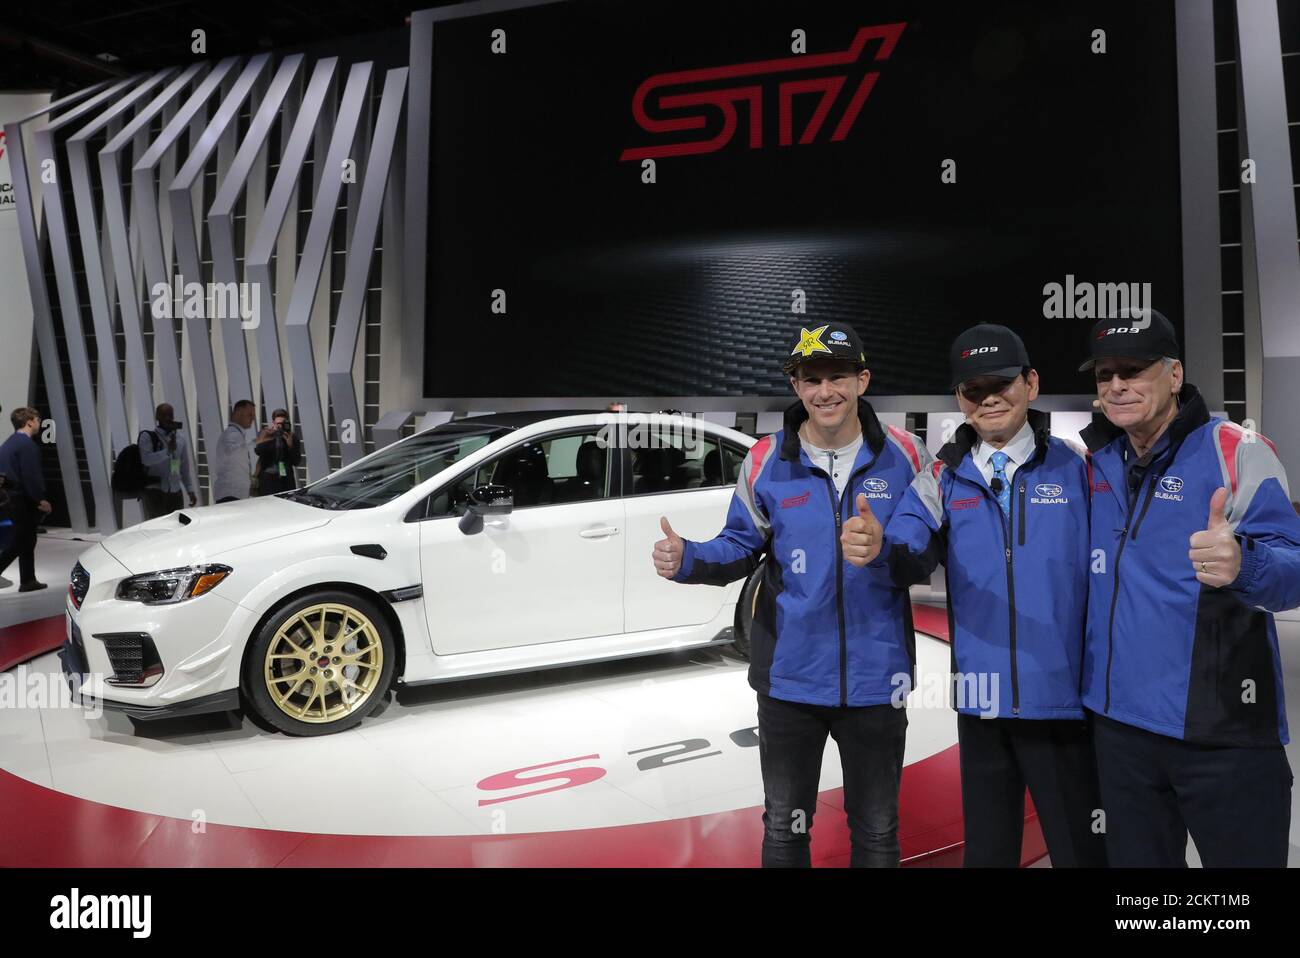 Rally race car driver Scott Speed (L) poses with Subaru executives during the unveiling of the Subaru WRX STI S209 at the North American International Auto Show in Detroit, Michigan, U.S., January 14, 2019. REUTERS/Brendan McDermid Stock Photo